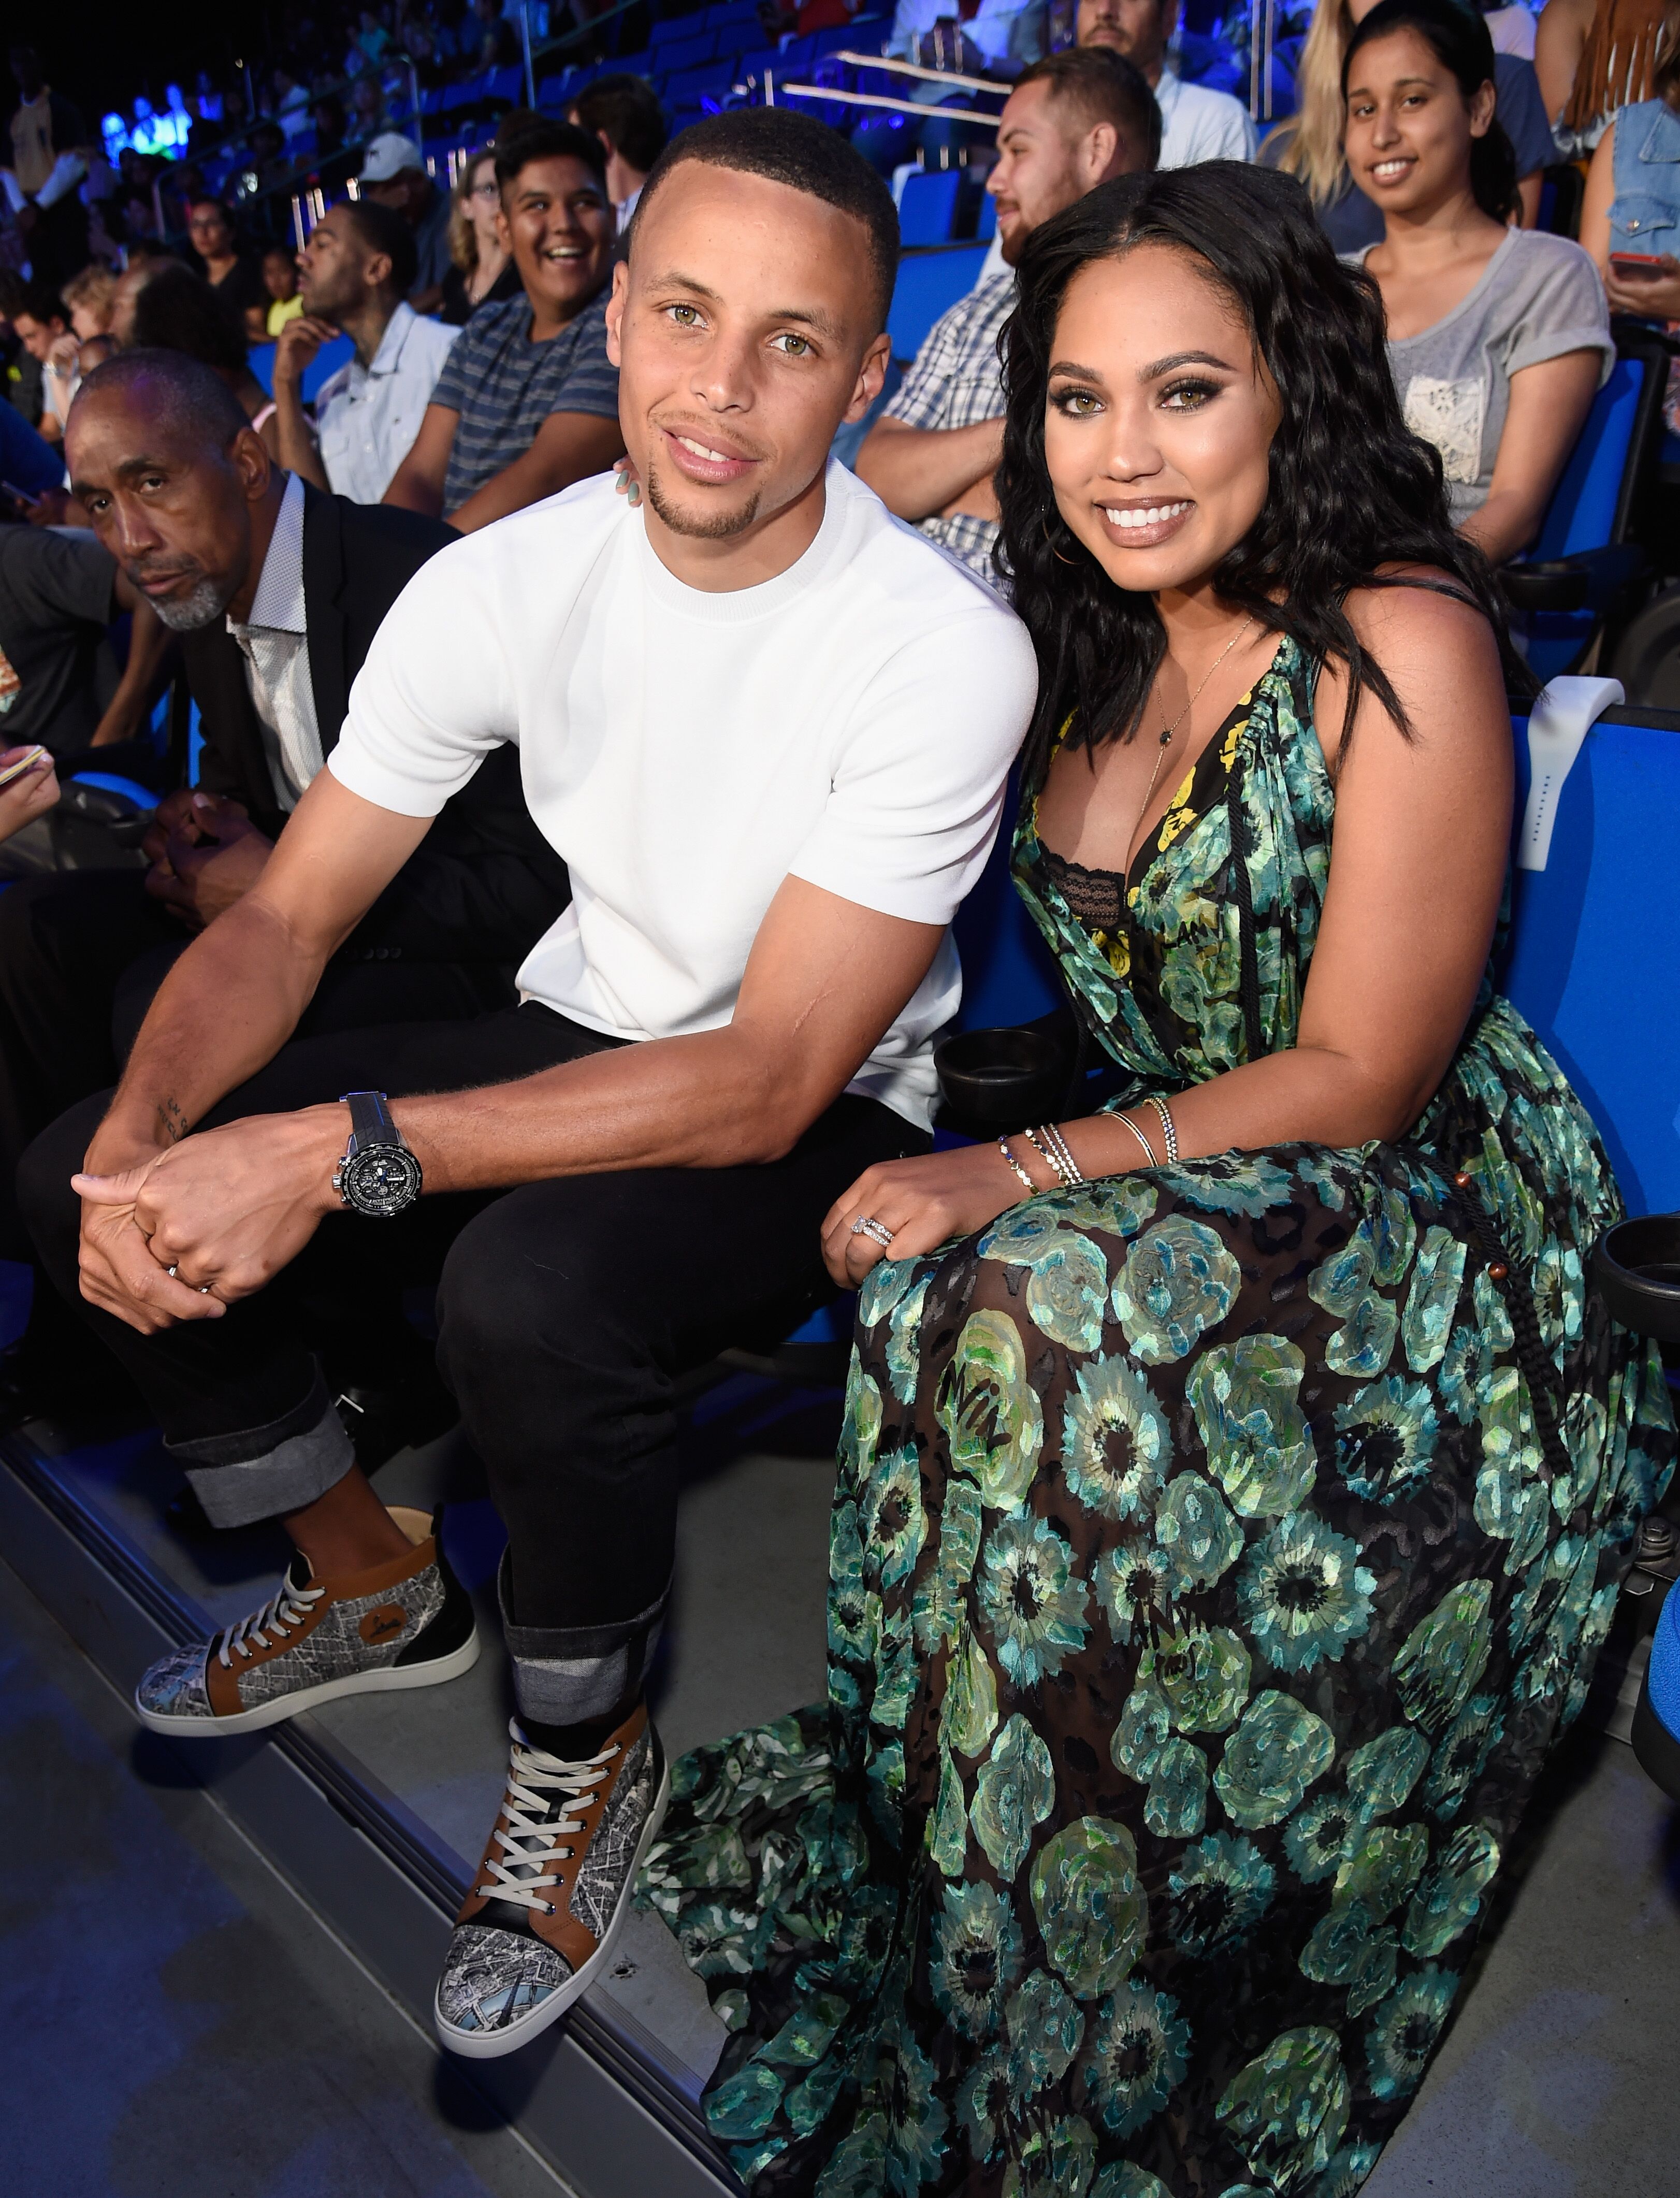 Stephen Curry and Ayesha Curry attend the Nickelodeon Kids' Choice Sports Awards 2016 at UCLA's Pauley Pavilion on July 14, 2016. | Source: Getty Images